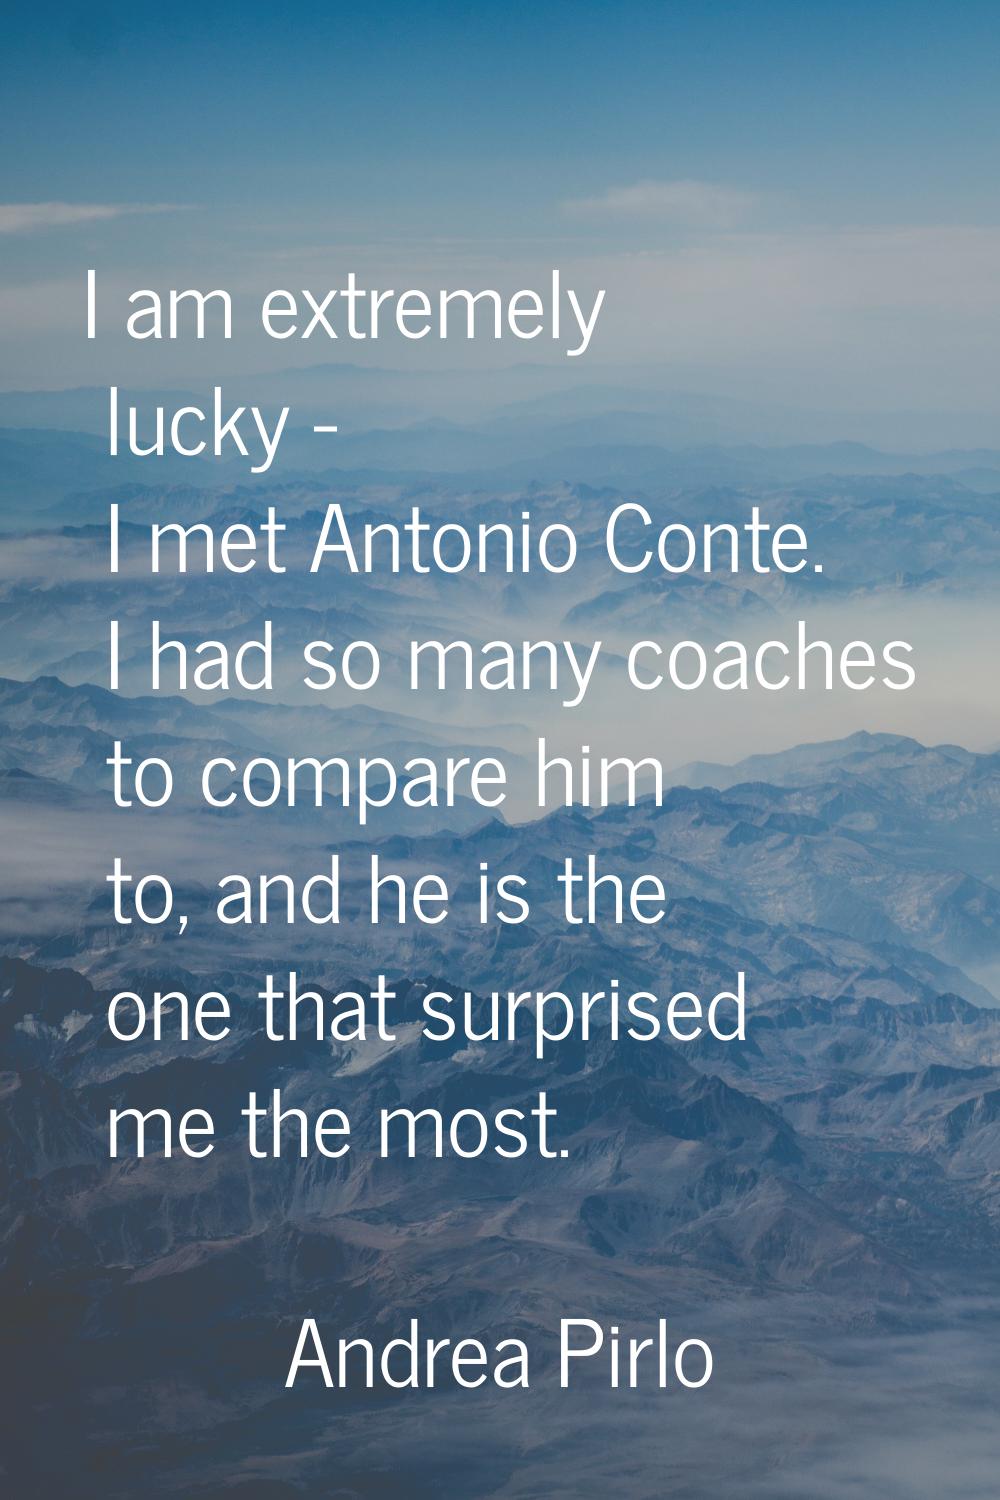 I am extremely lucky - I met Antonio Conte. I had so many coaches to compare him to, and he is the 